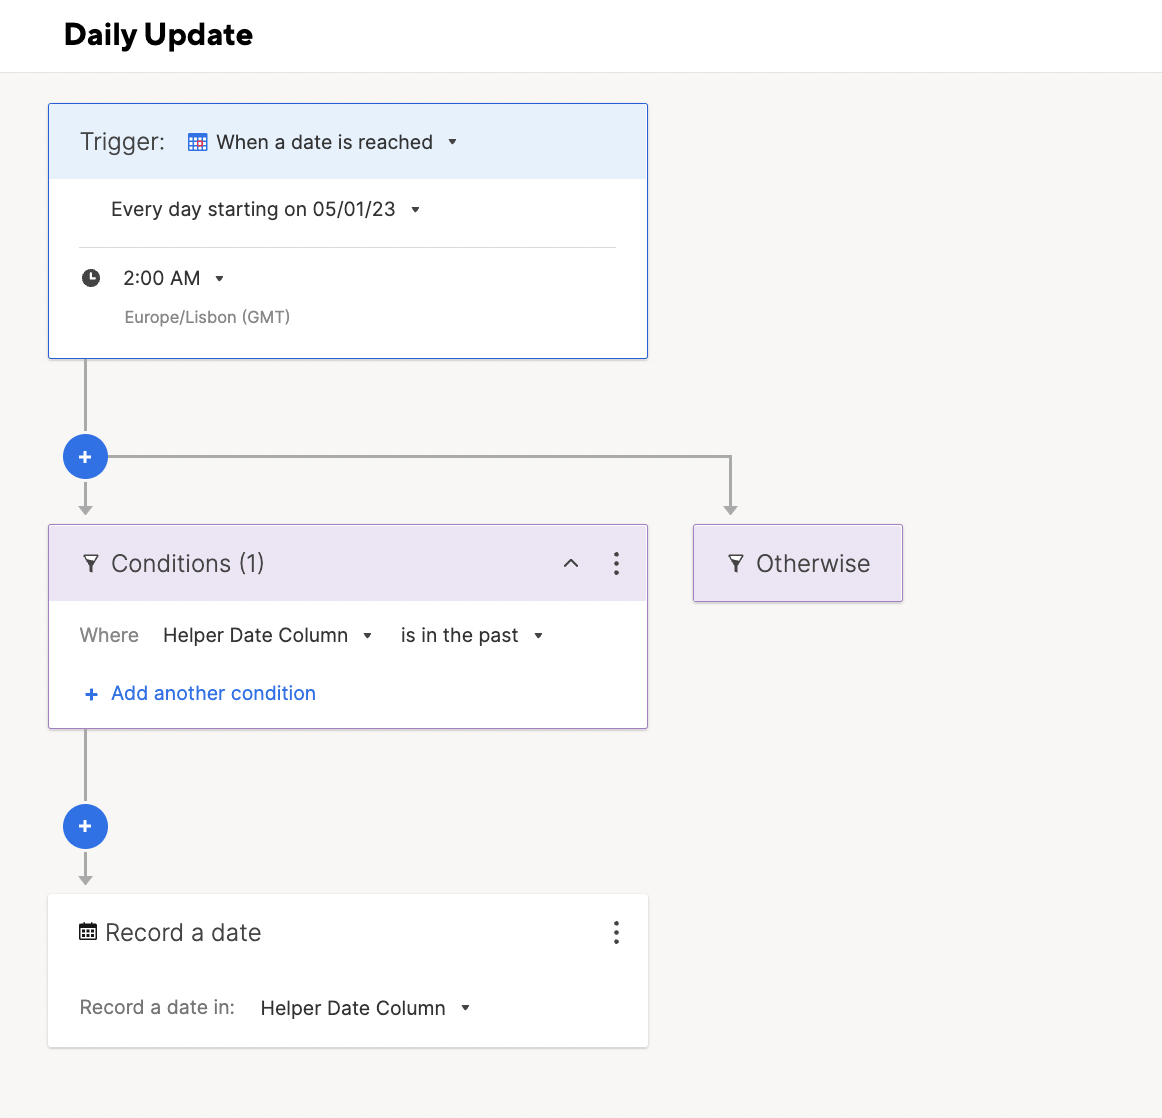 This image shows daily update workflow example.